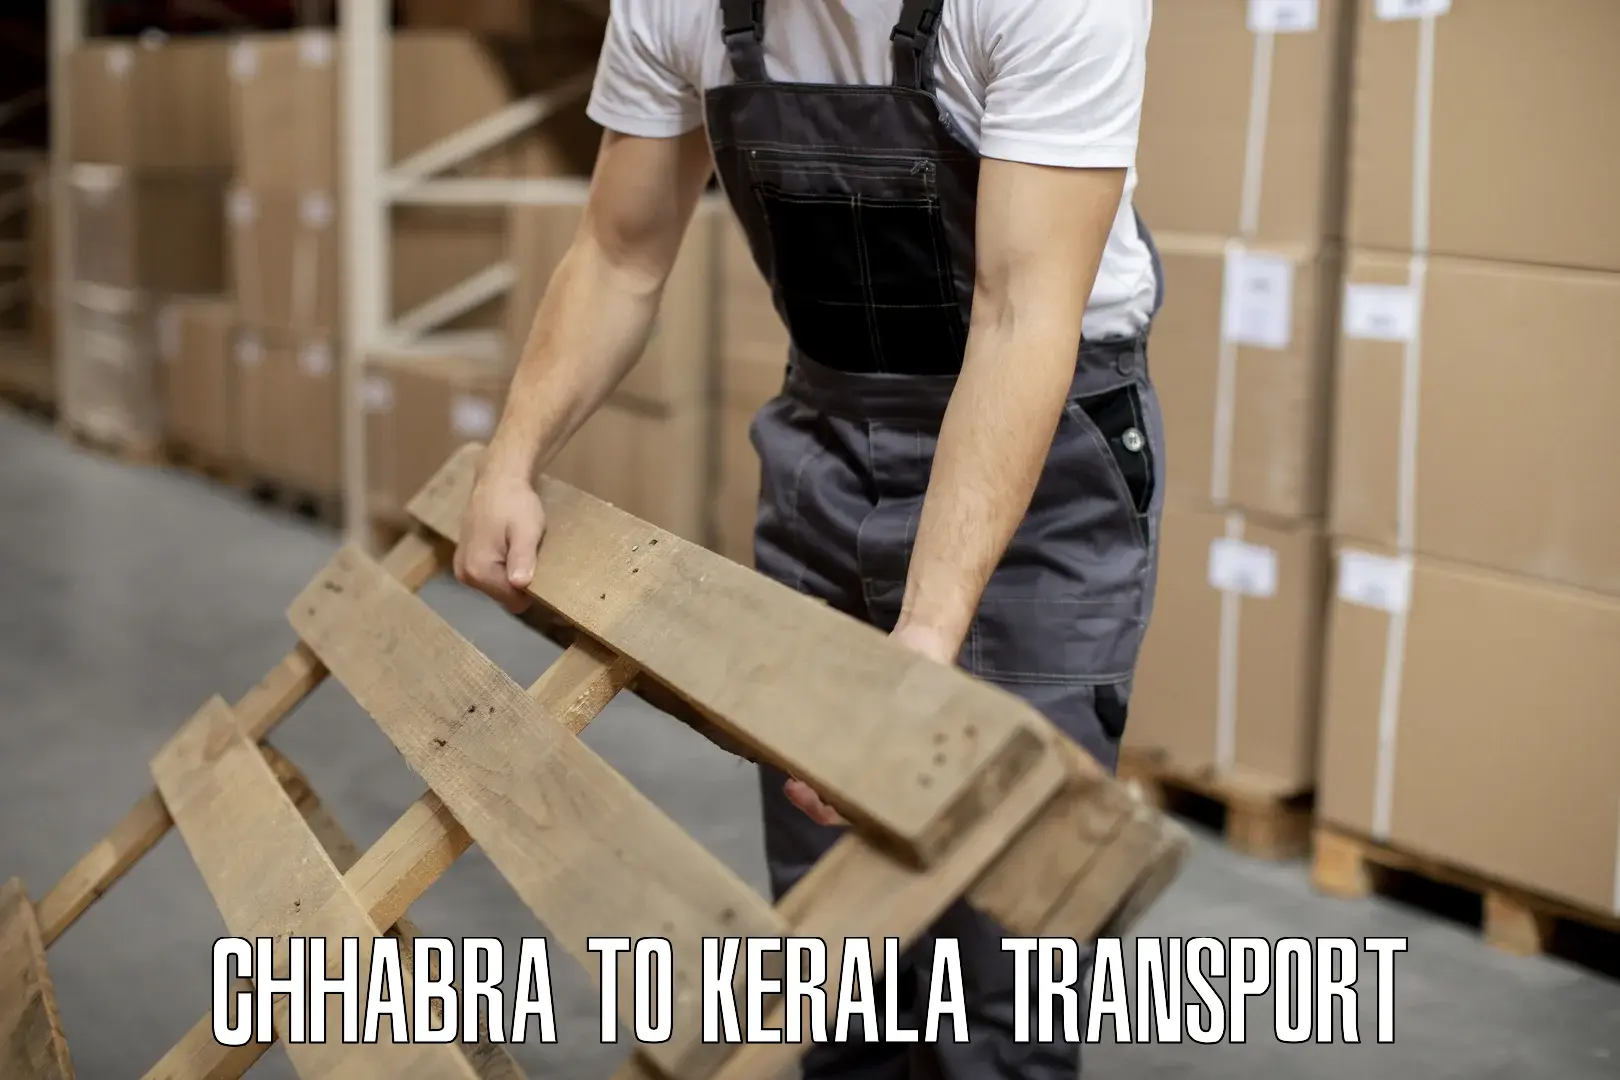 Transport shared services Chhabra to Kochi